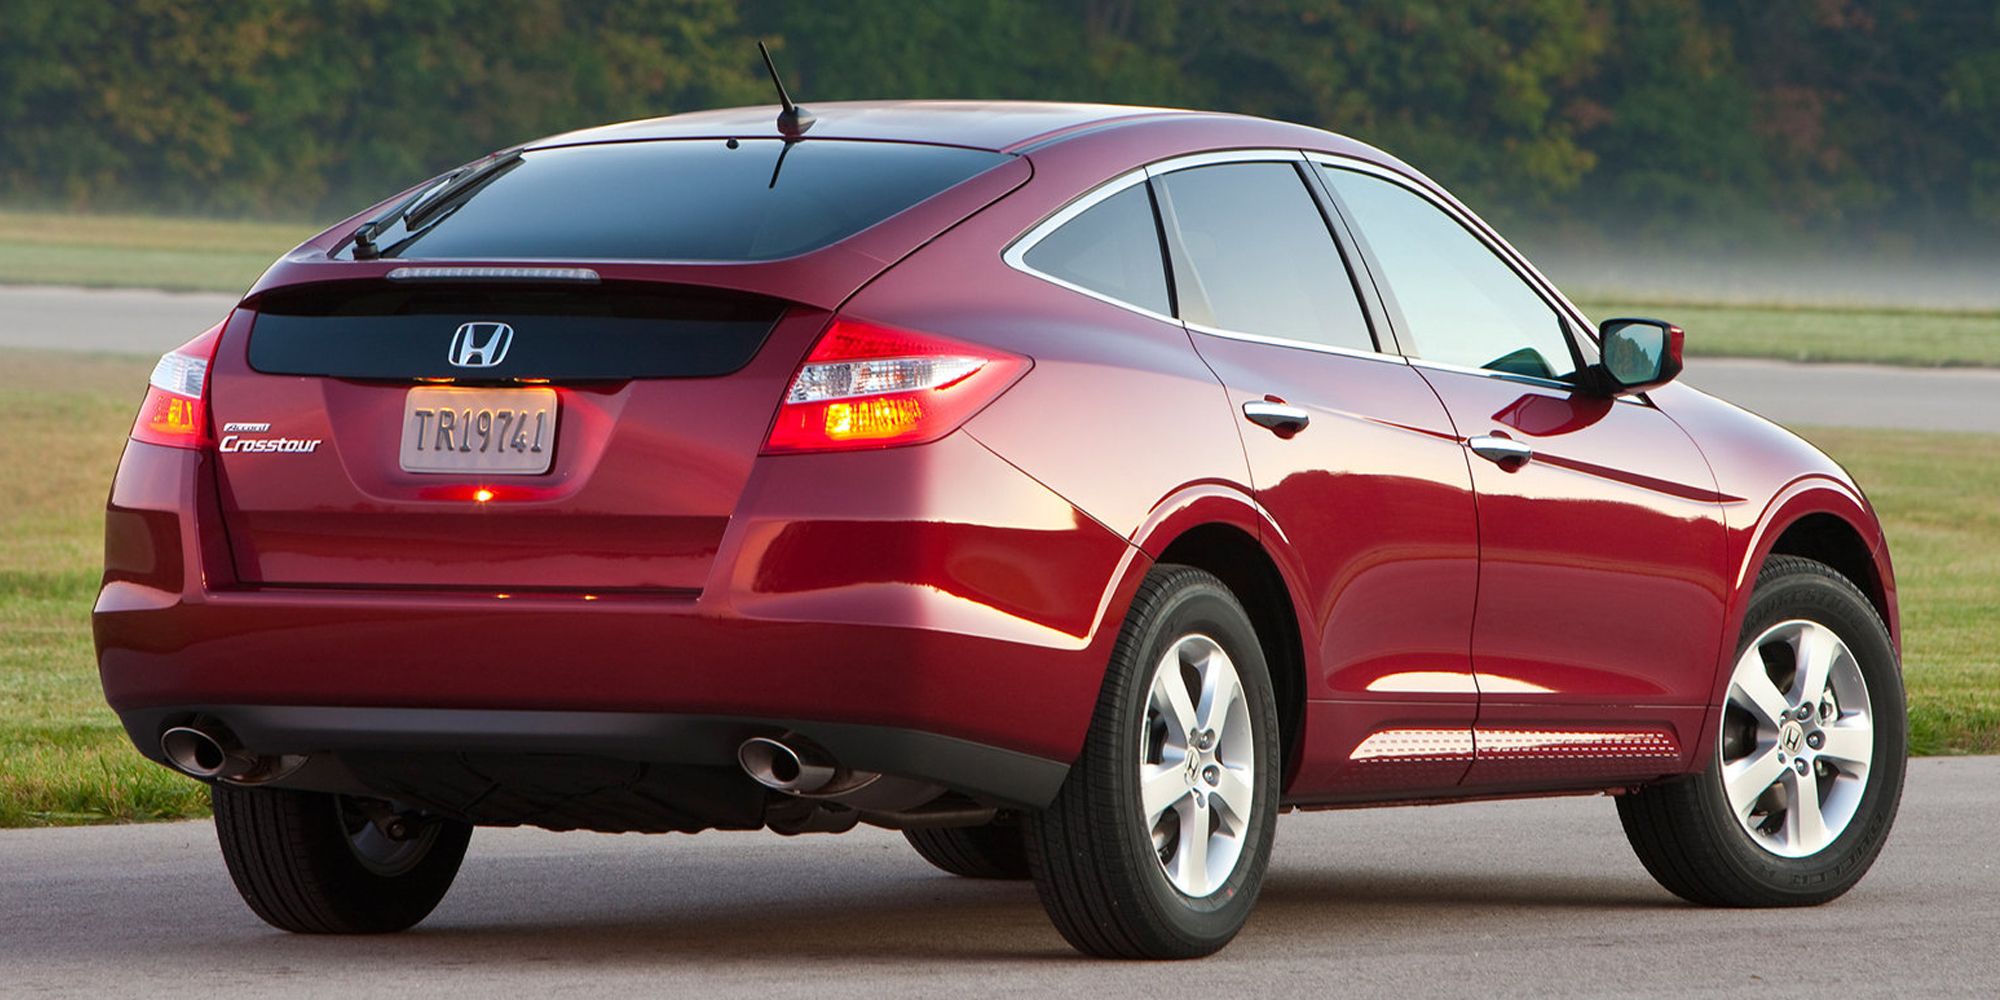 The rear of the Accord Crosstour